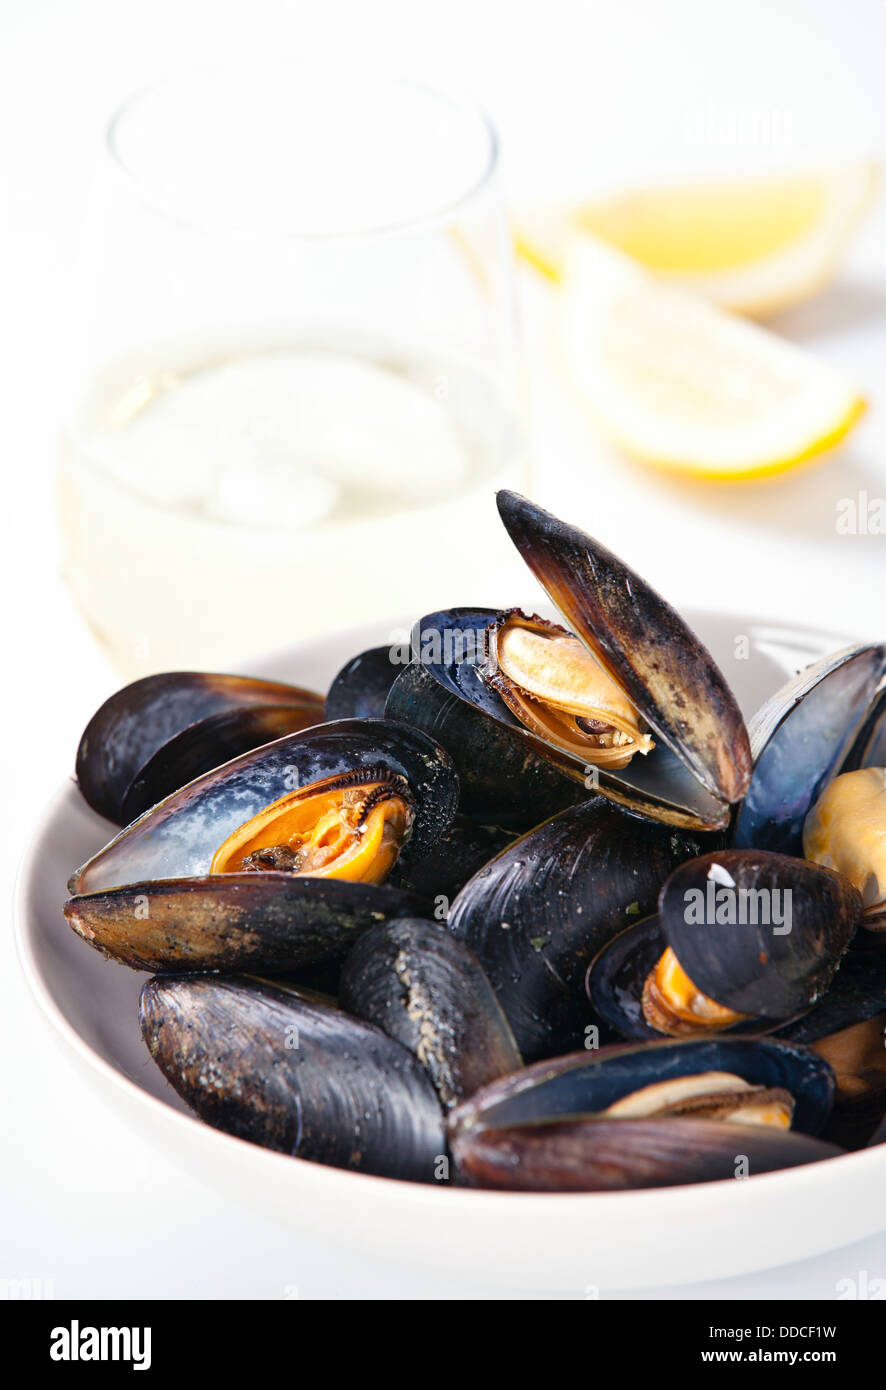 Mussels and clams served in white bowl with glasses of white wine and piece of lemon Stock Photo